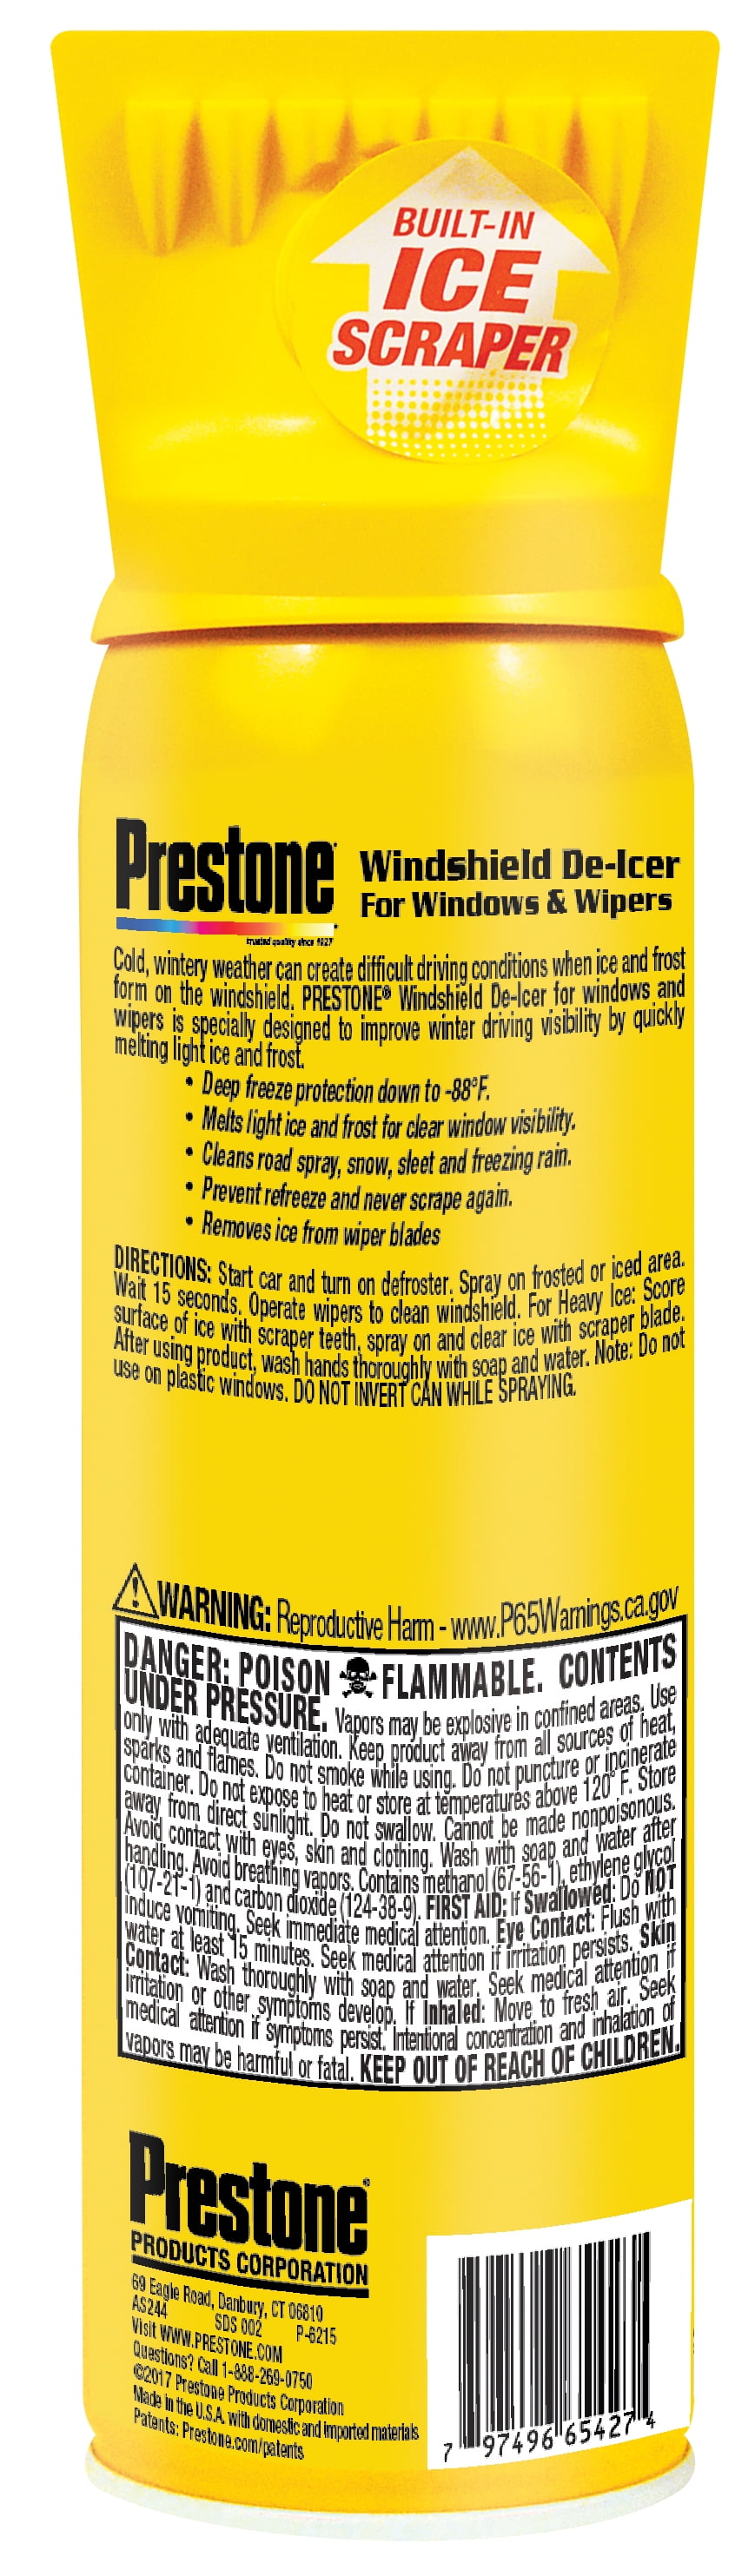 Uheoun Essential Household Tools,Car Glass Defroster Deicing Agent  Windscreen Antifreeze Deicing Spray 500ml on Clearance 